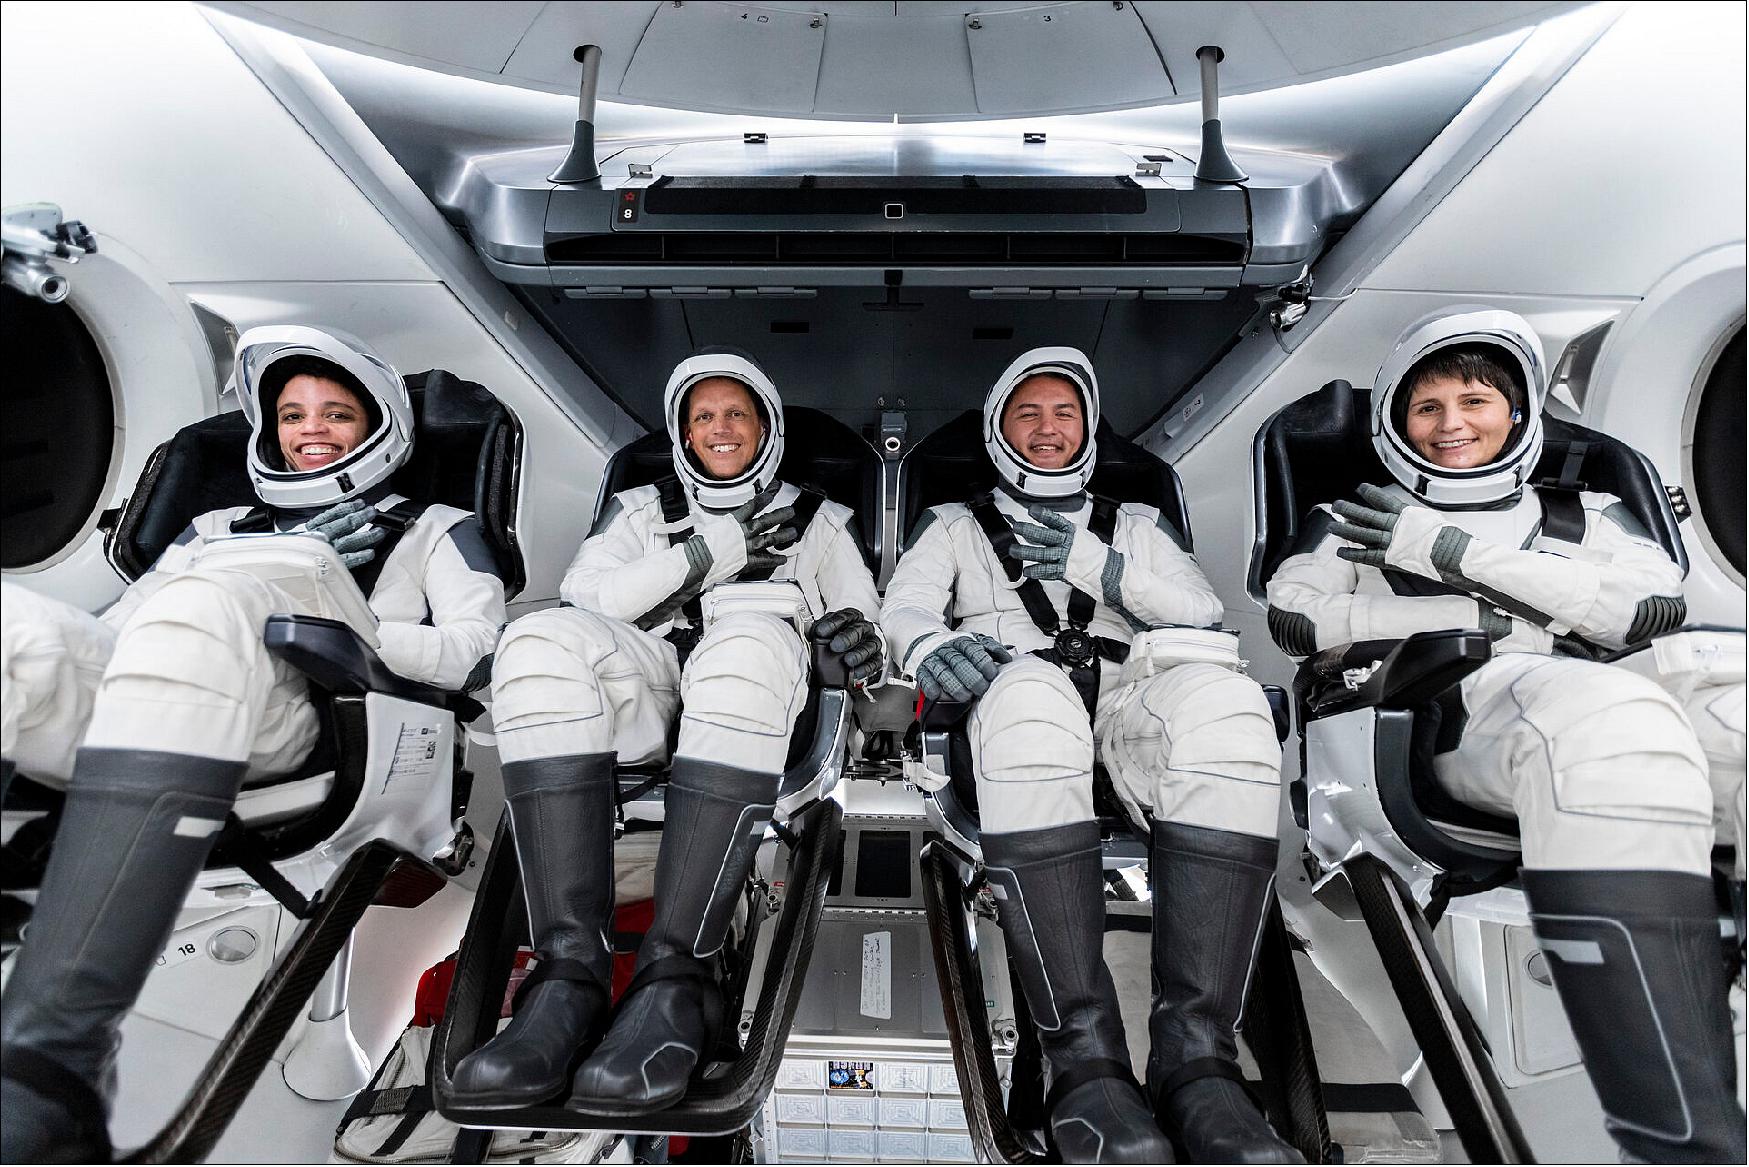 Figure 6: ESA astronaut Samantha Cristoforetti (at right) is all smiles alongside her Crew-4 mates during a training session at SpaceX headquarters in Hawthorne, California, USA (image credit: NASA/SpaceX)